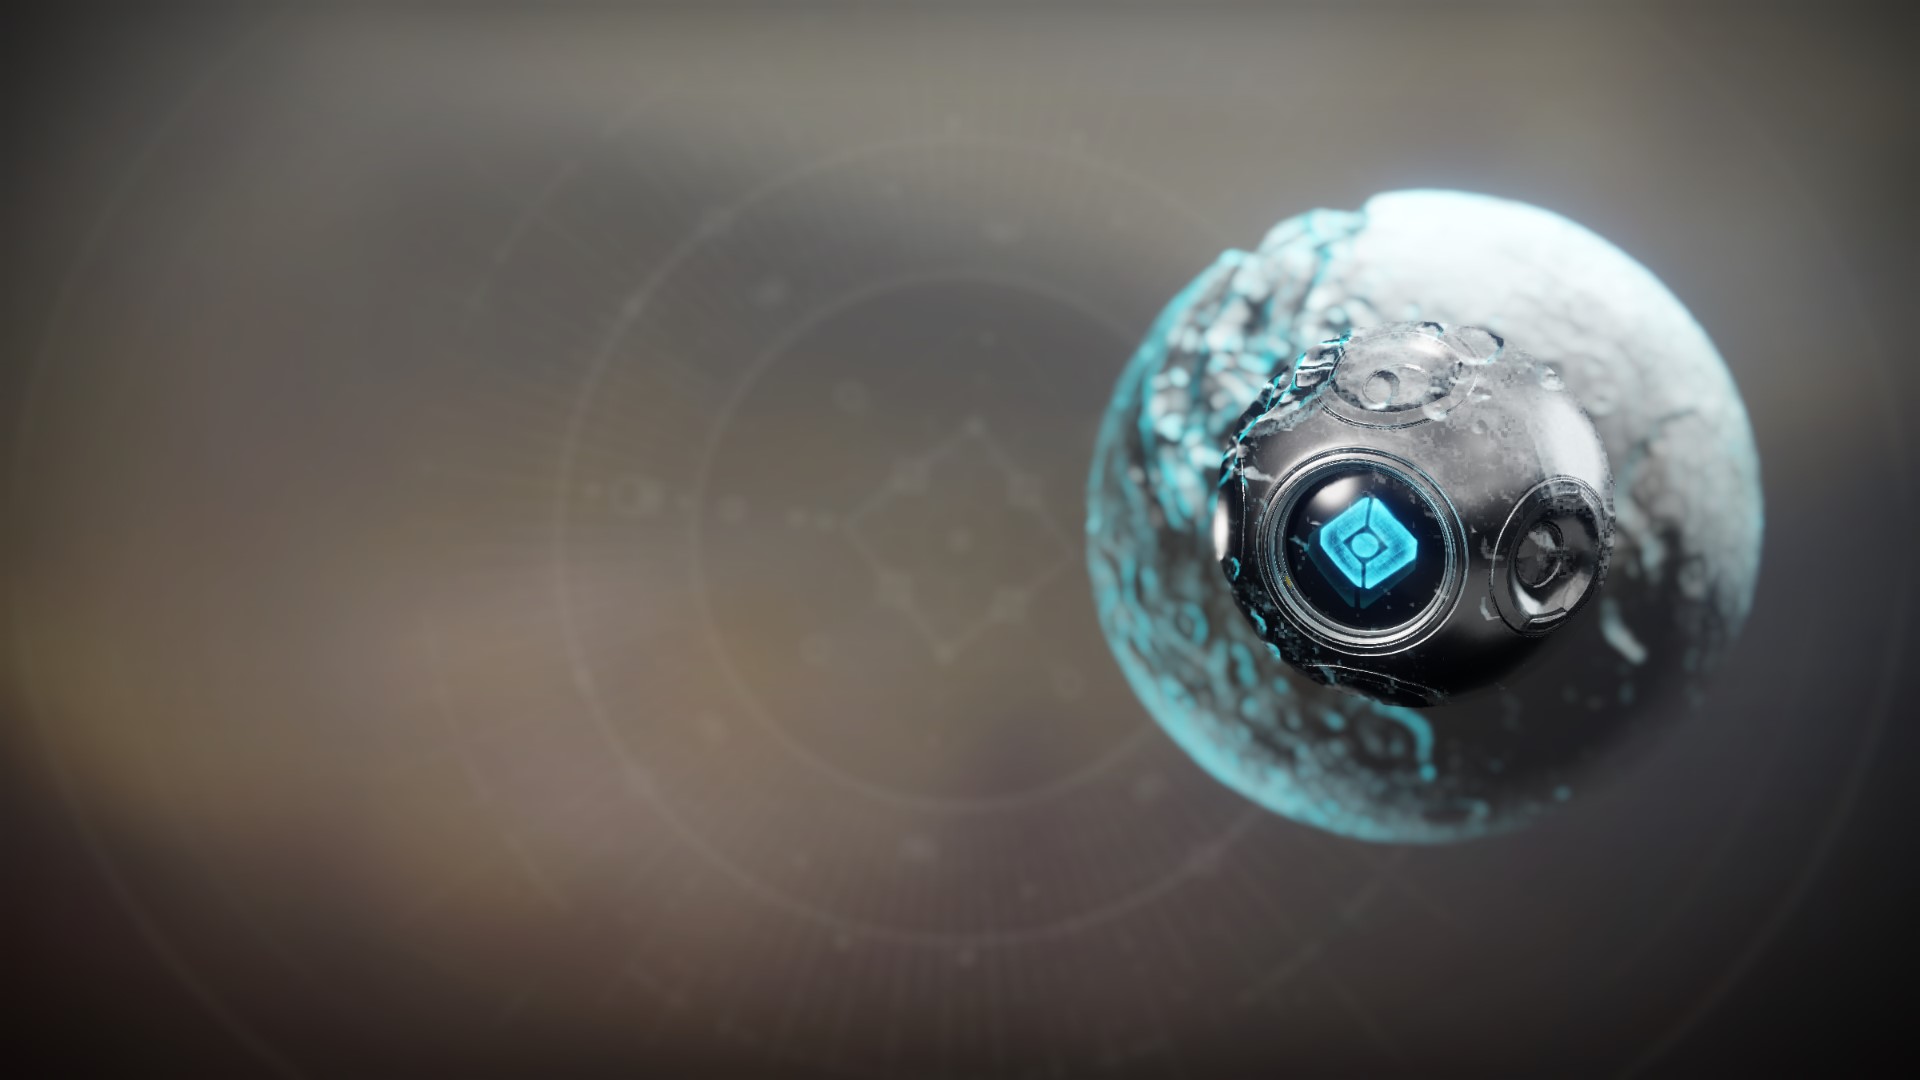 An in-game render of the Lunar Shell.